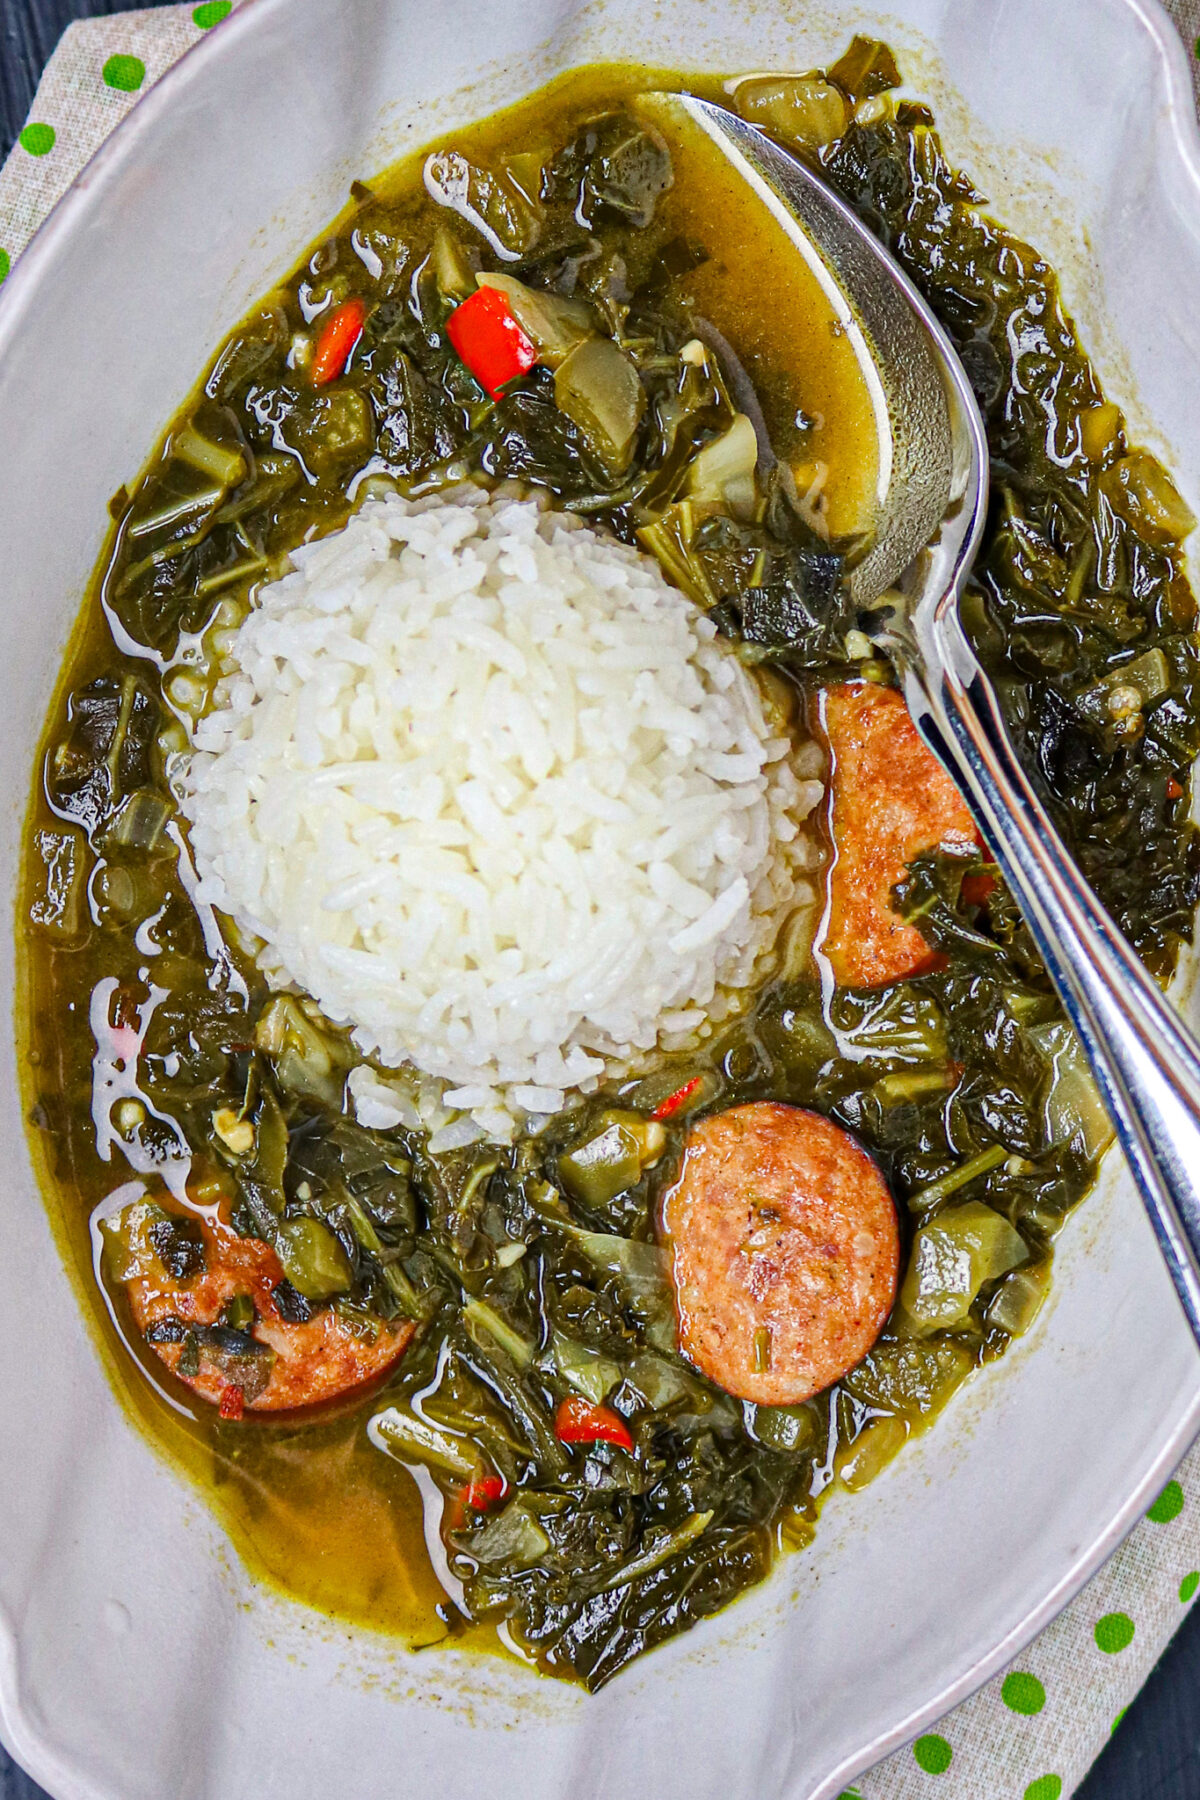 A bowl of gumbo zHerbes' with a scoop of white rice and a silver spoon in it.